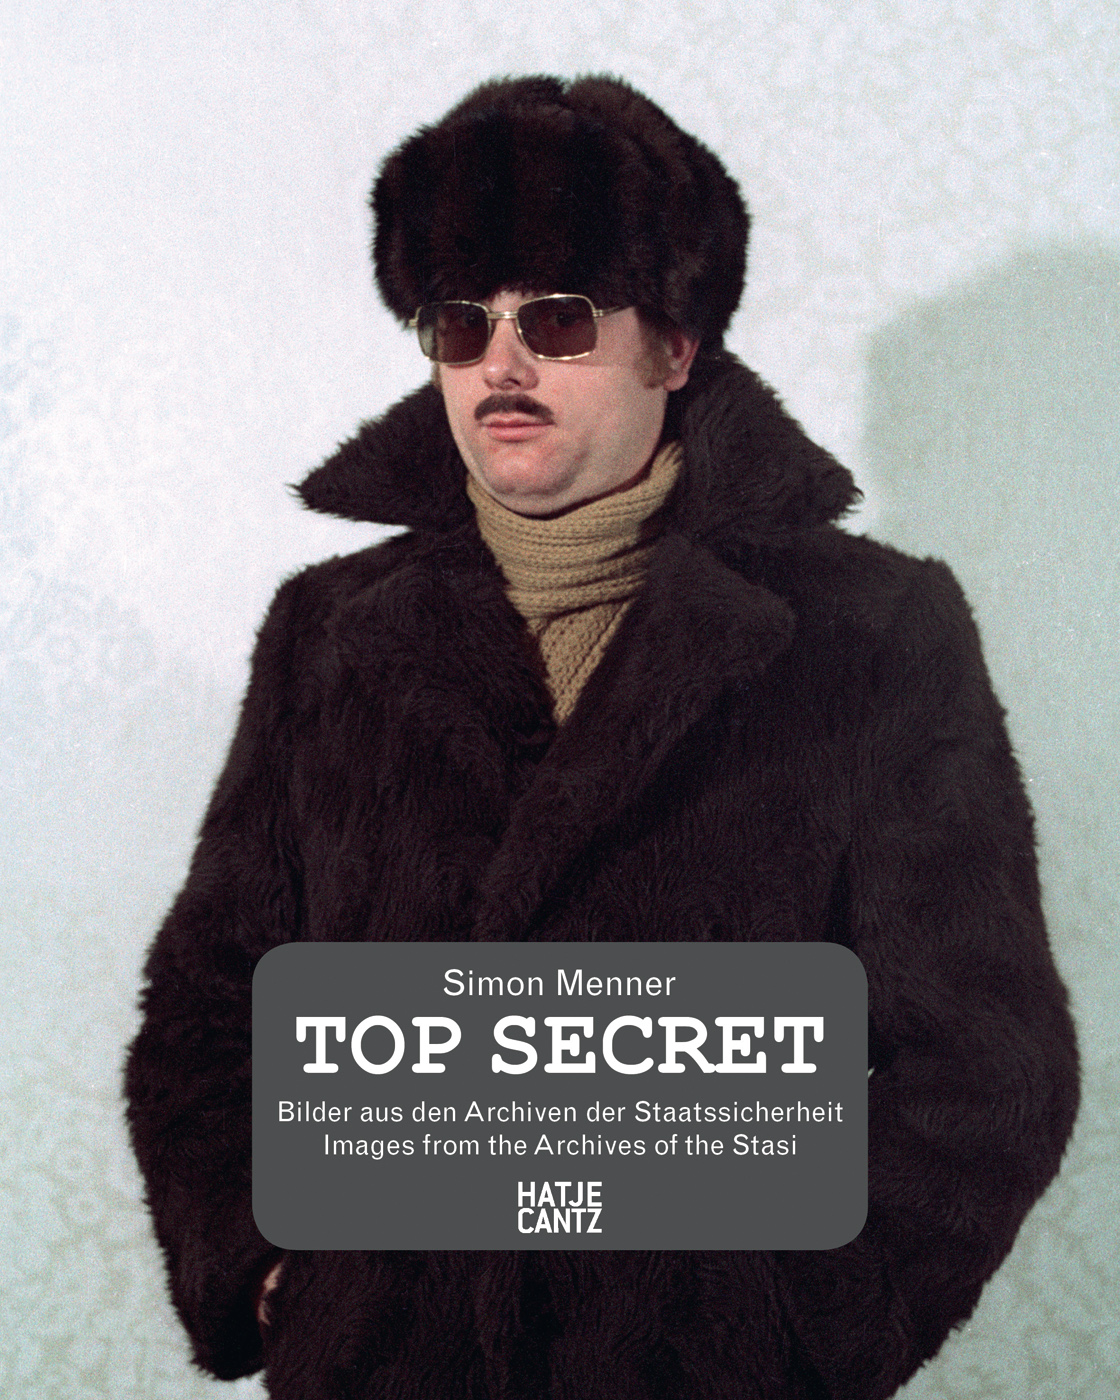 Top Secret. Images from the Stasi Archives di Simon Menner